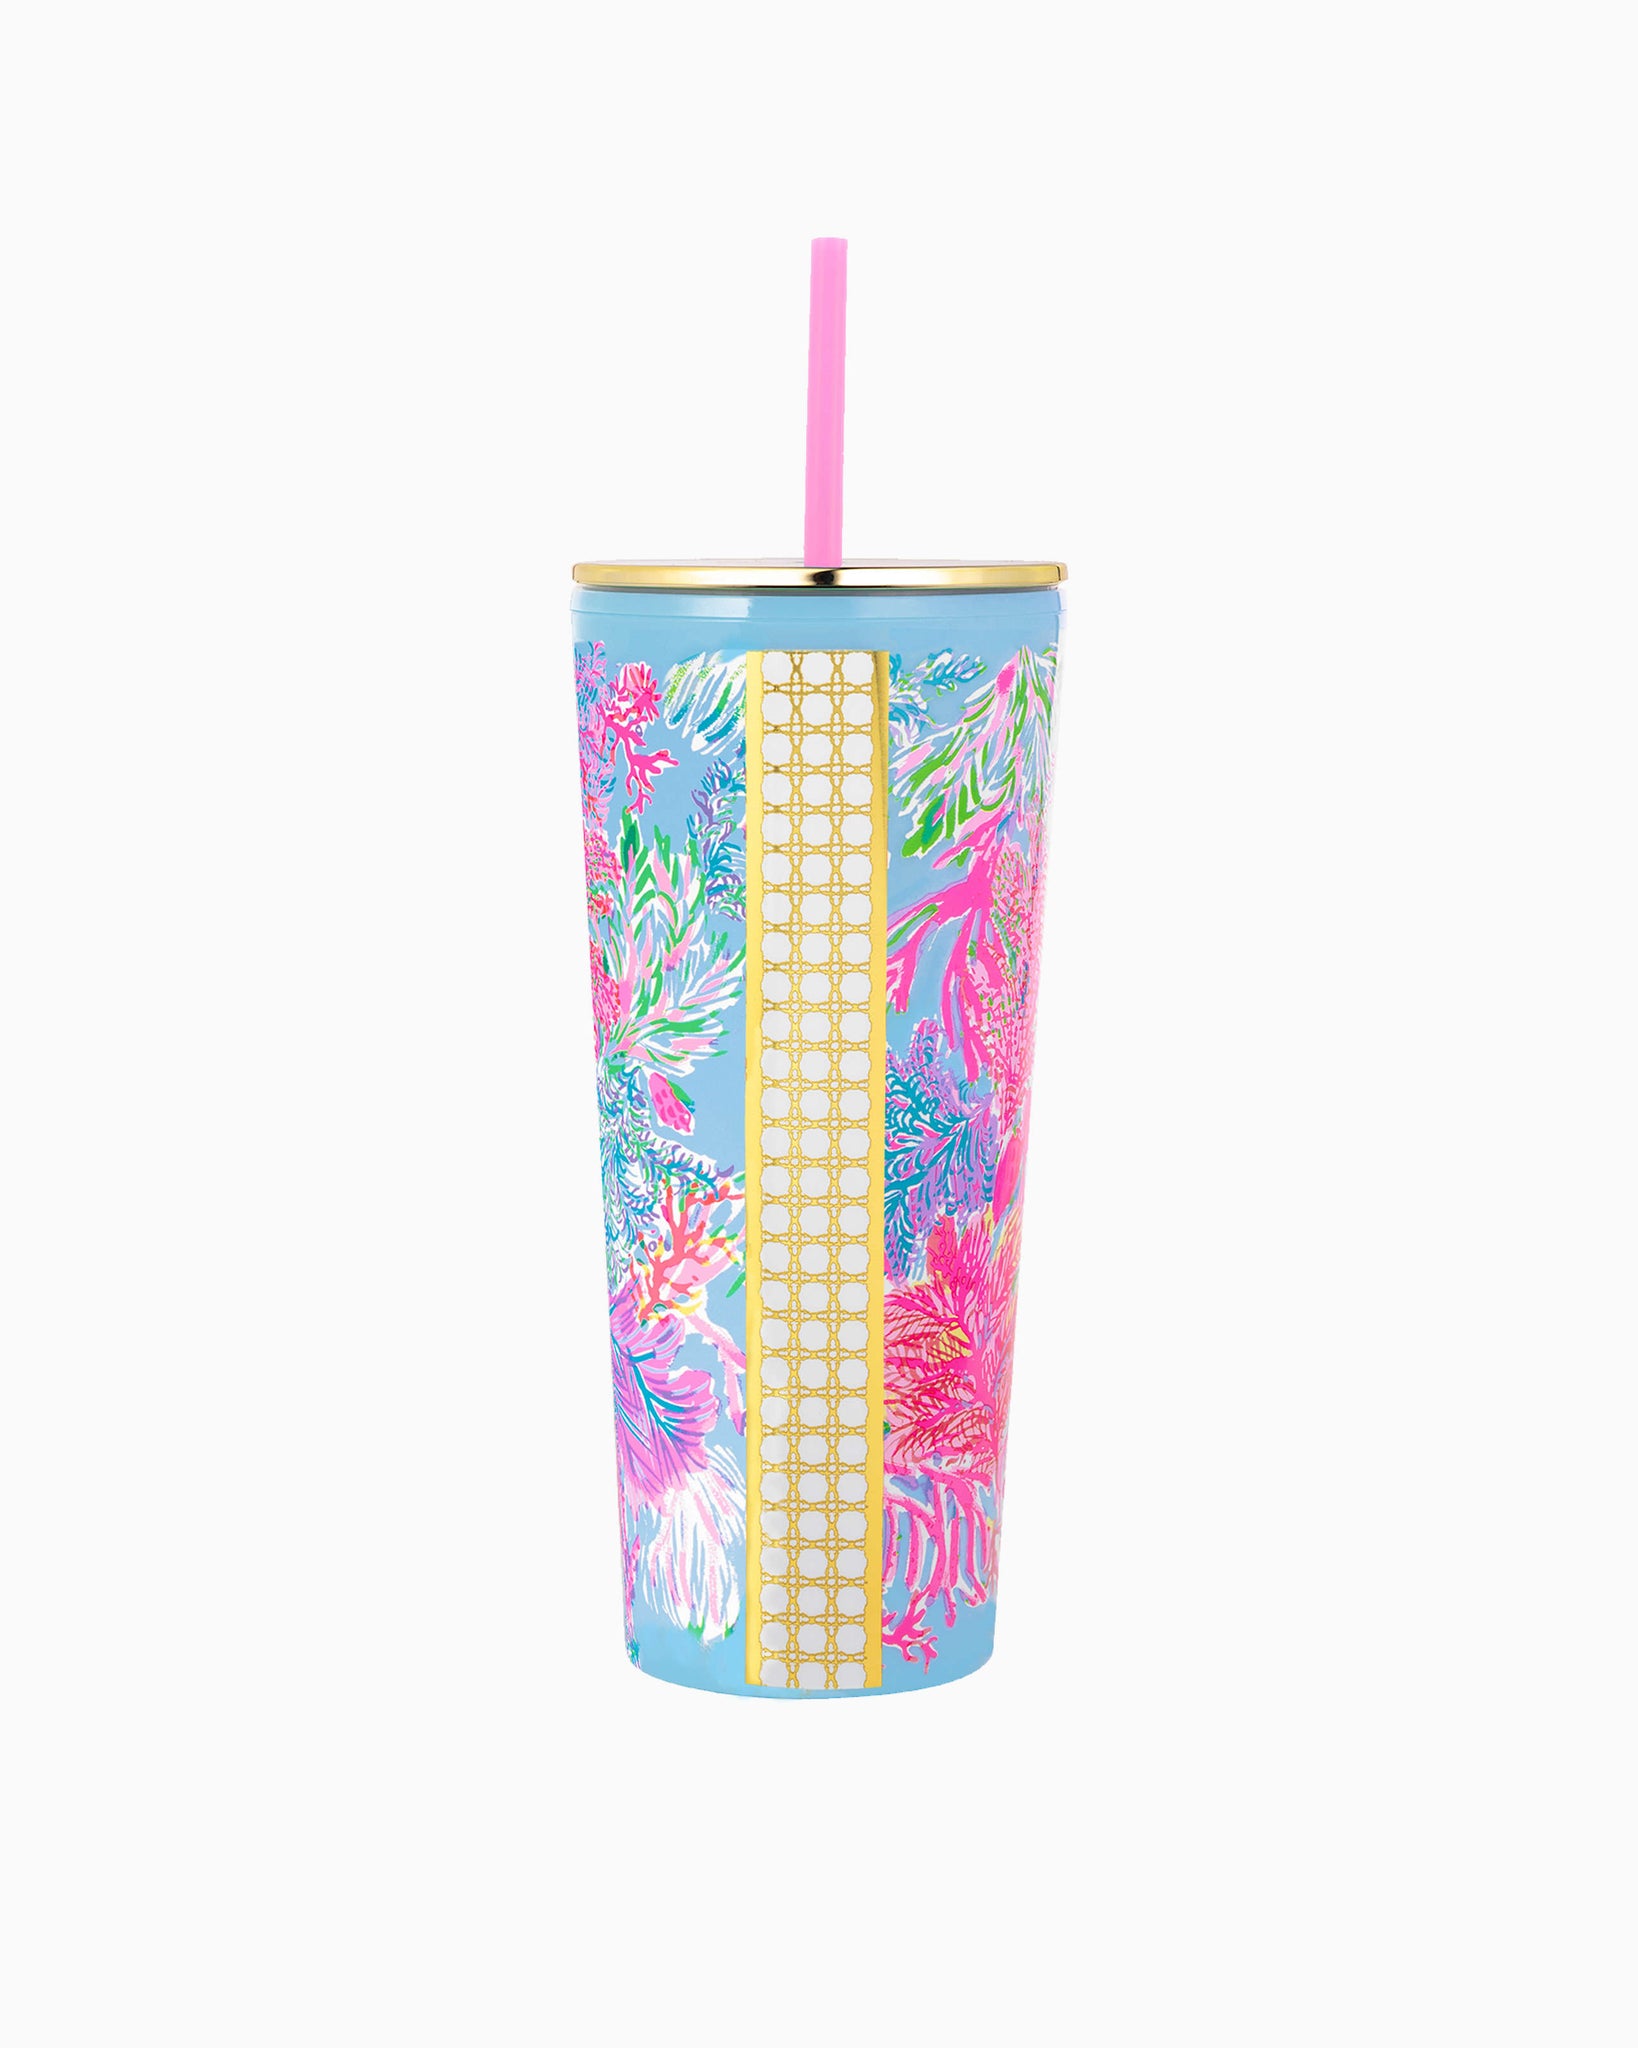 Lilly Pulitzer Tumbler with Straw in Cay to my Heart